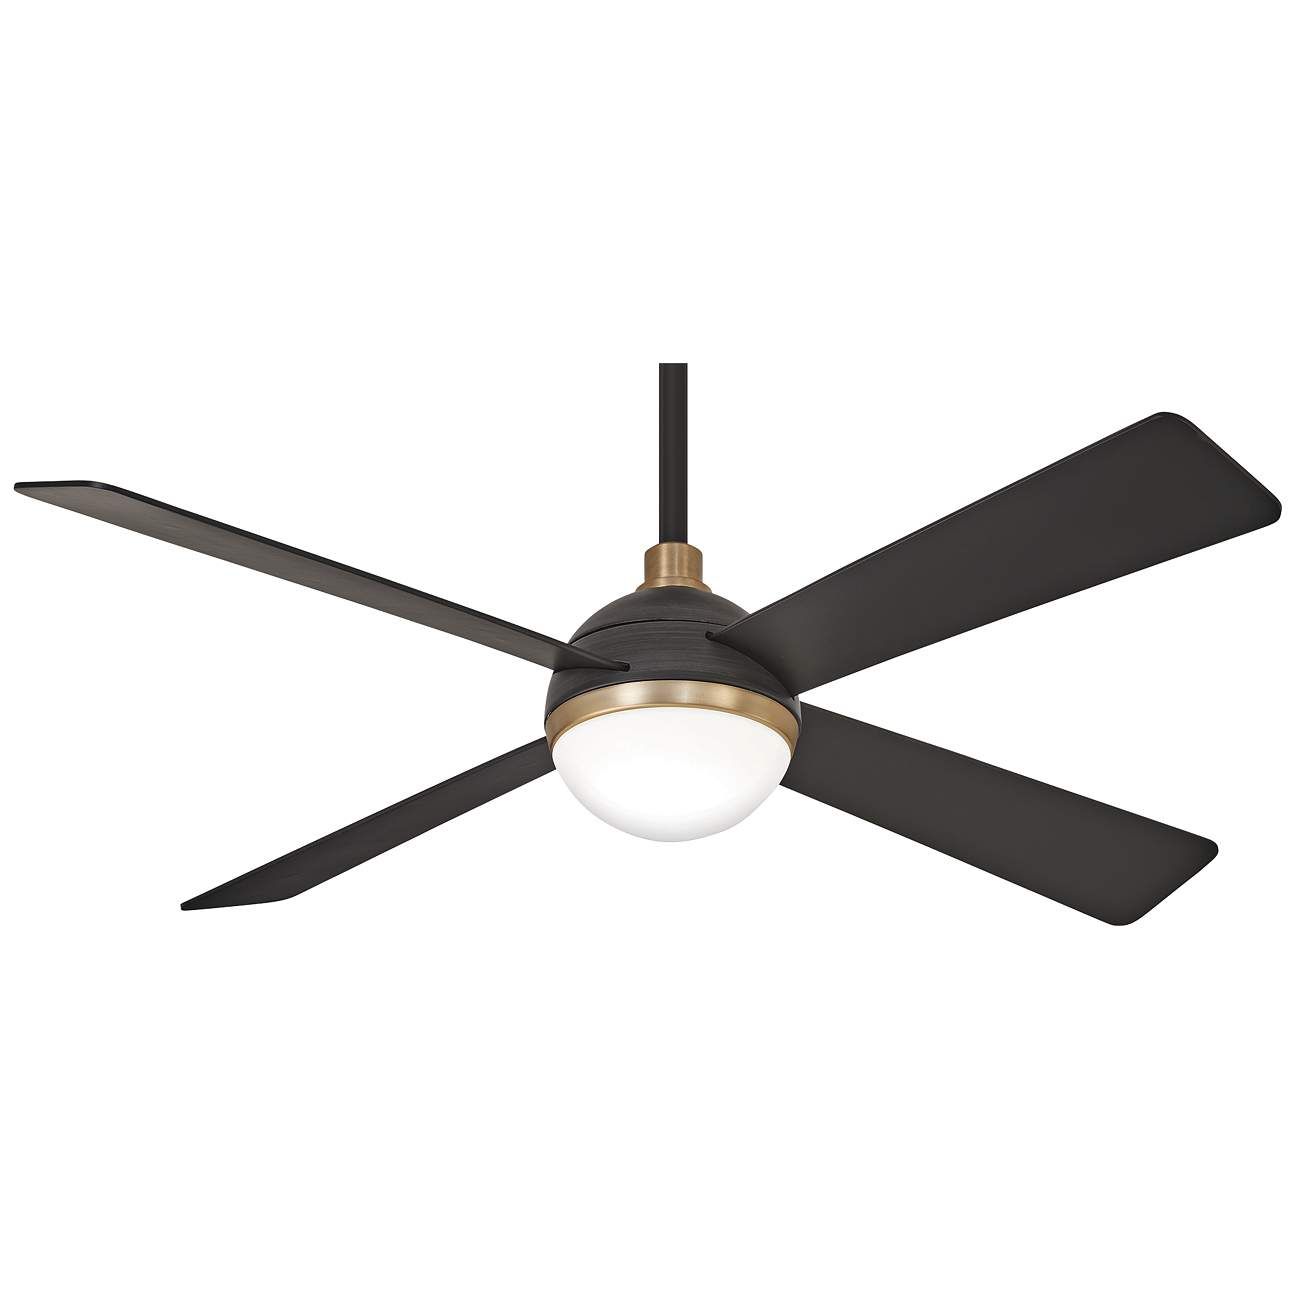 54" Minka Aire Orb Brushed Carbon LED Ceiling Fan with Remote Control - #67Y94 | Lamps Plus | Lamps Plus